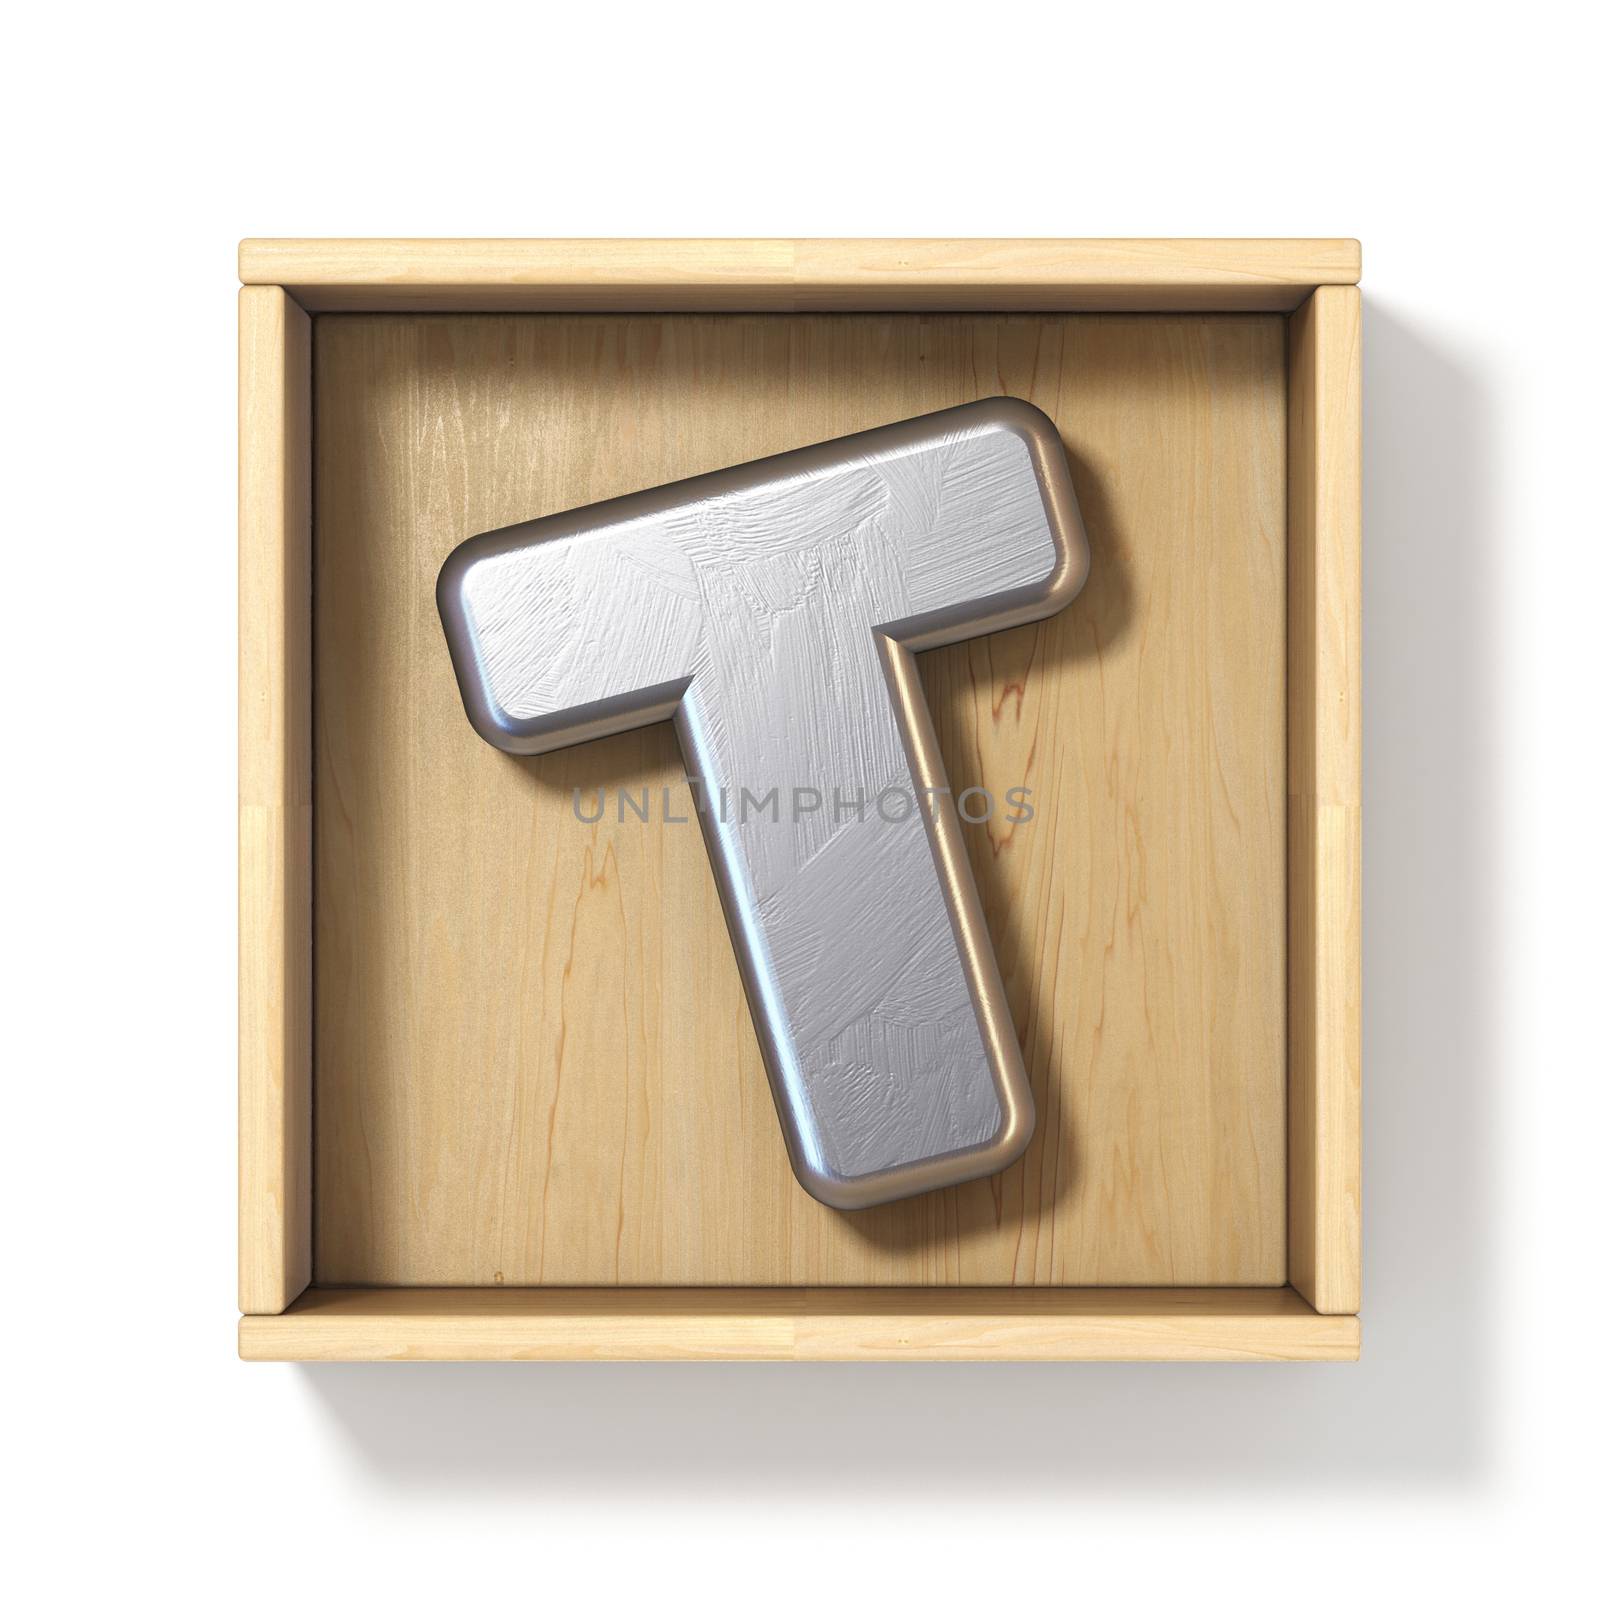 Silver metal letter T in wooden box 3D render illustration isolated on white background